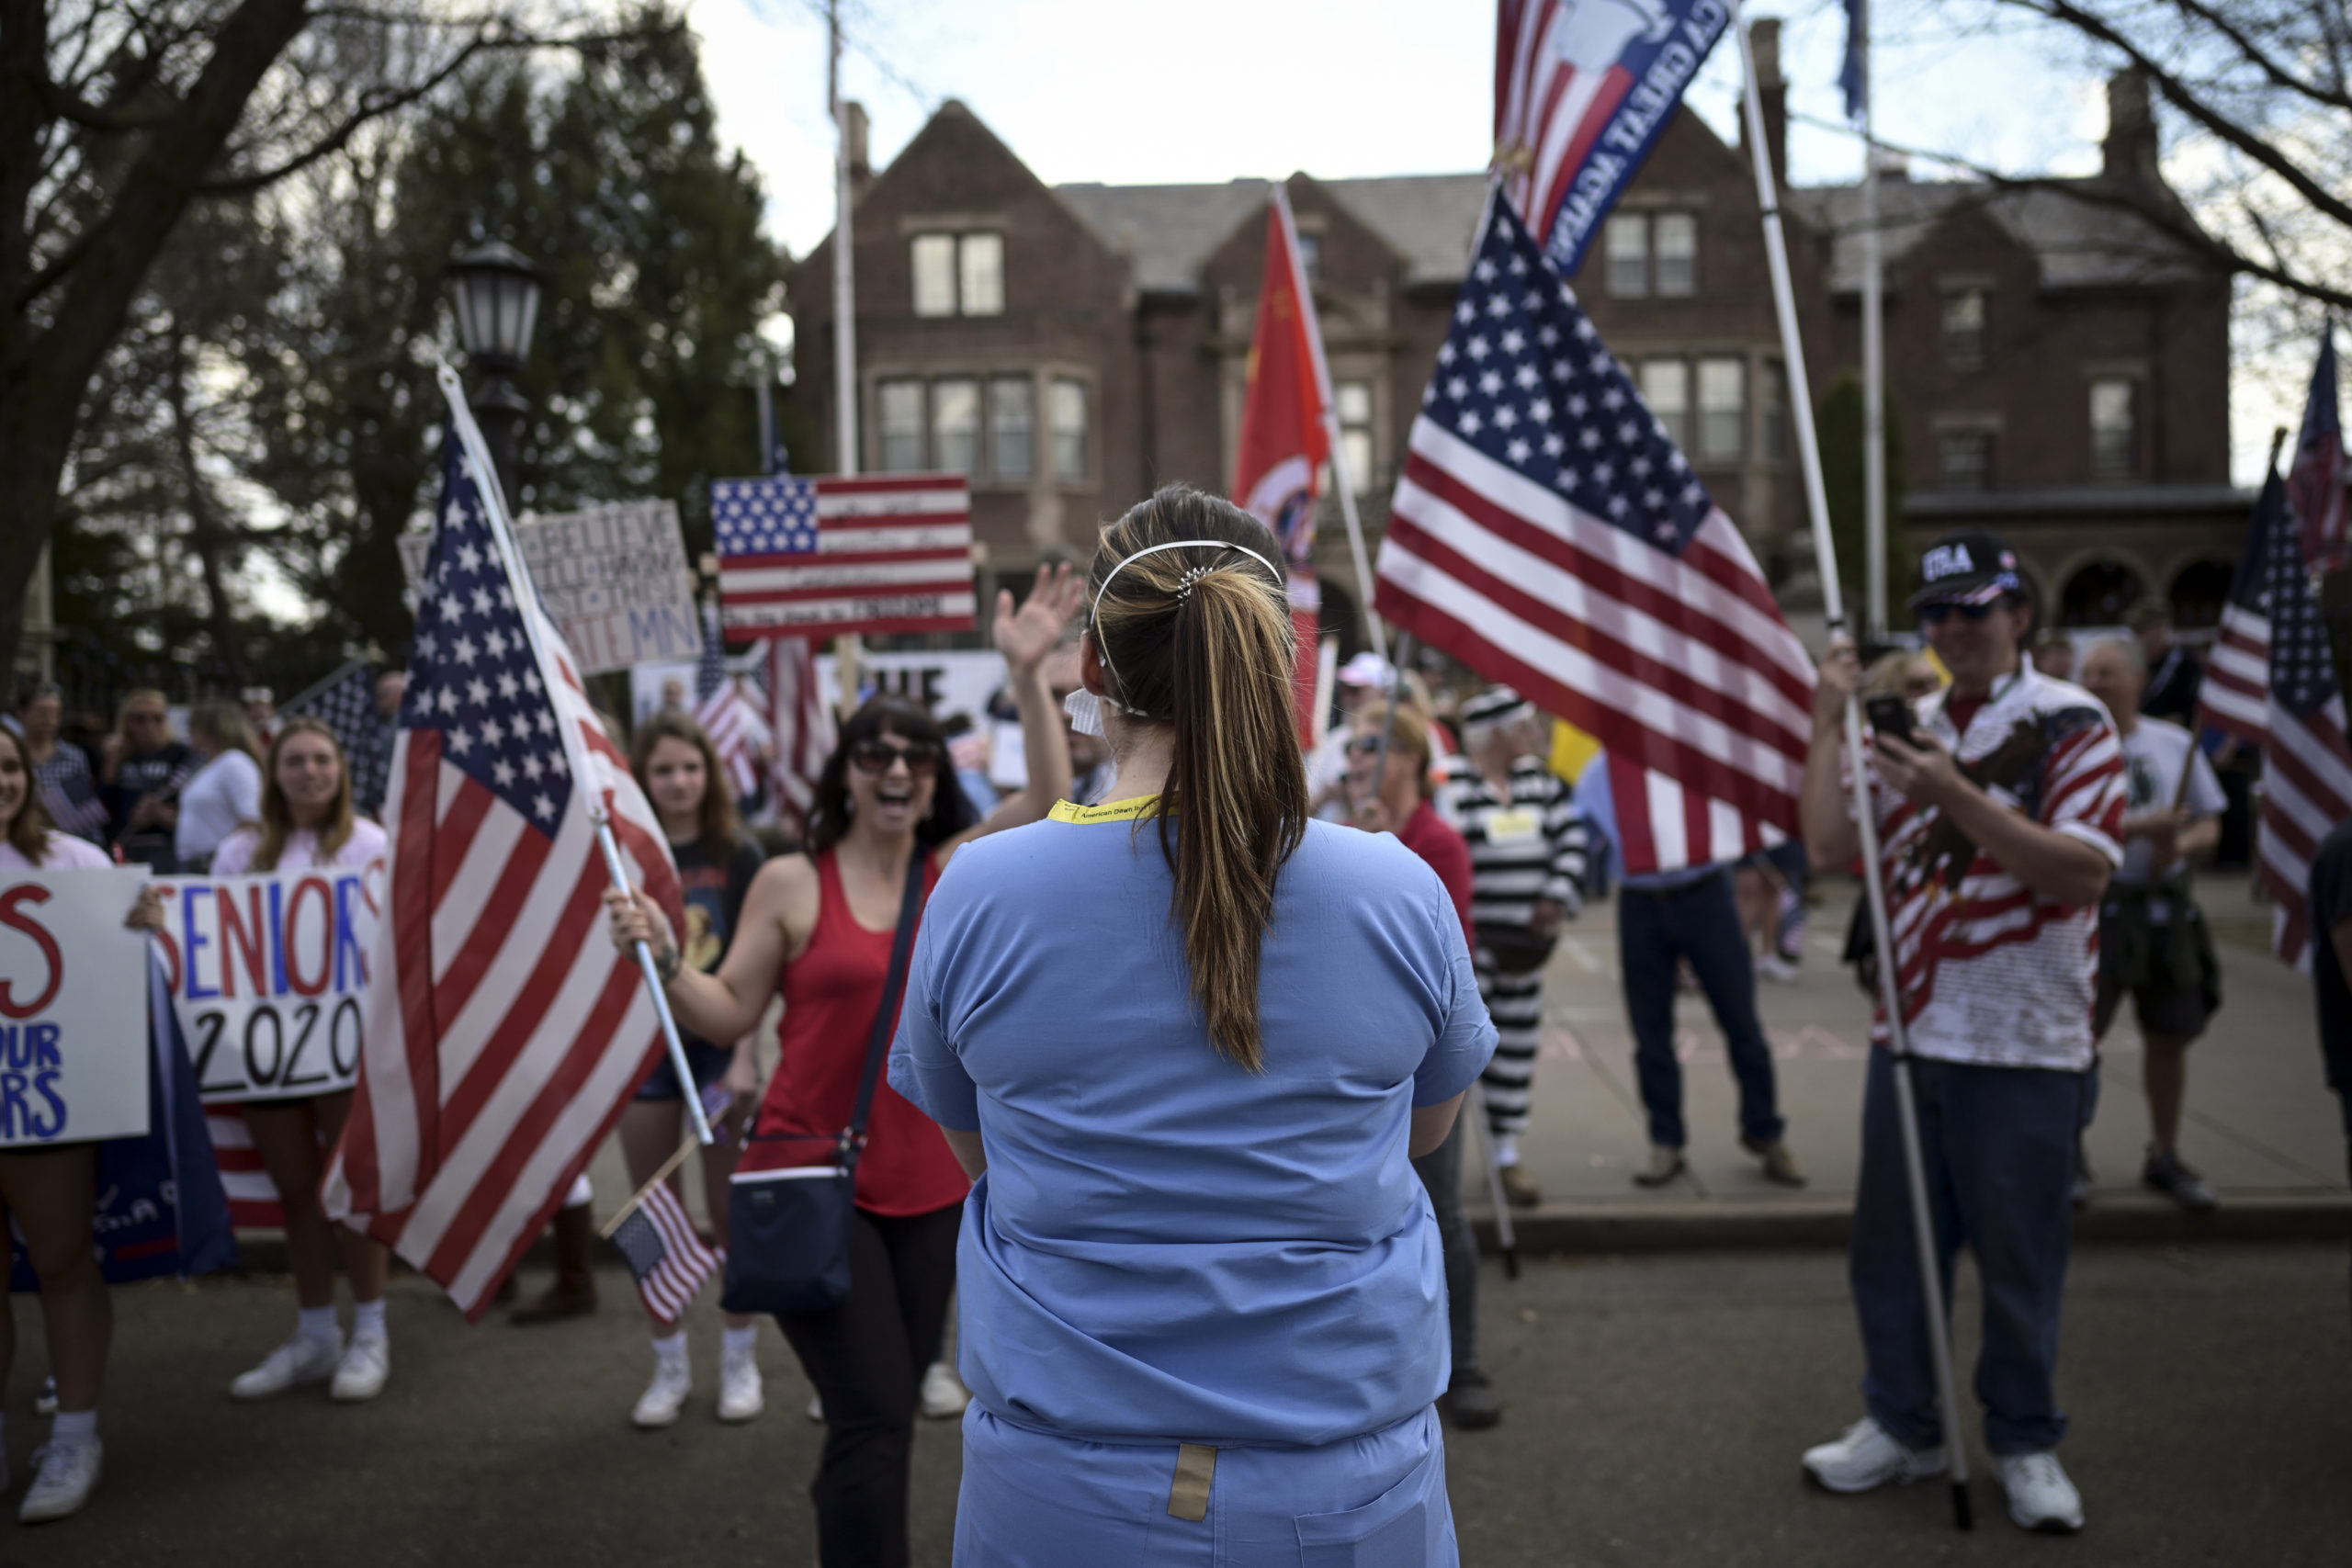 A woman who identified herself as a registered nurse in a local emergency room counterprotests in front of a demonstration to open up the state from the restrictions in place due to the new coronavirus, organized by the 3% United Patriots group, outside the Governor's Mansion, Saturday, April 25, 2020, in St. Paul, Minn. (Aaron Lavinsky/Star Tribune via AP)